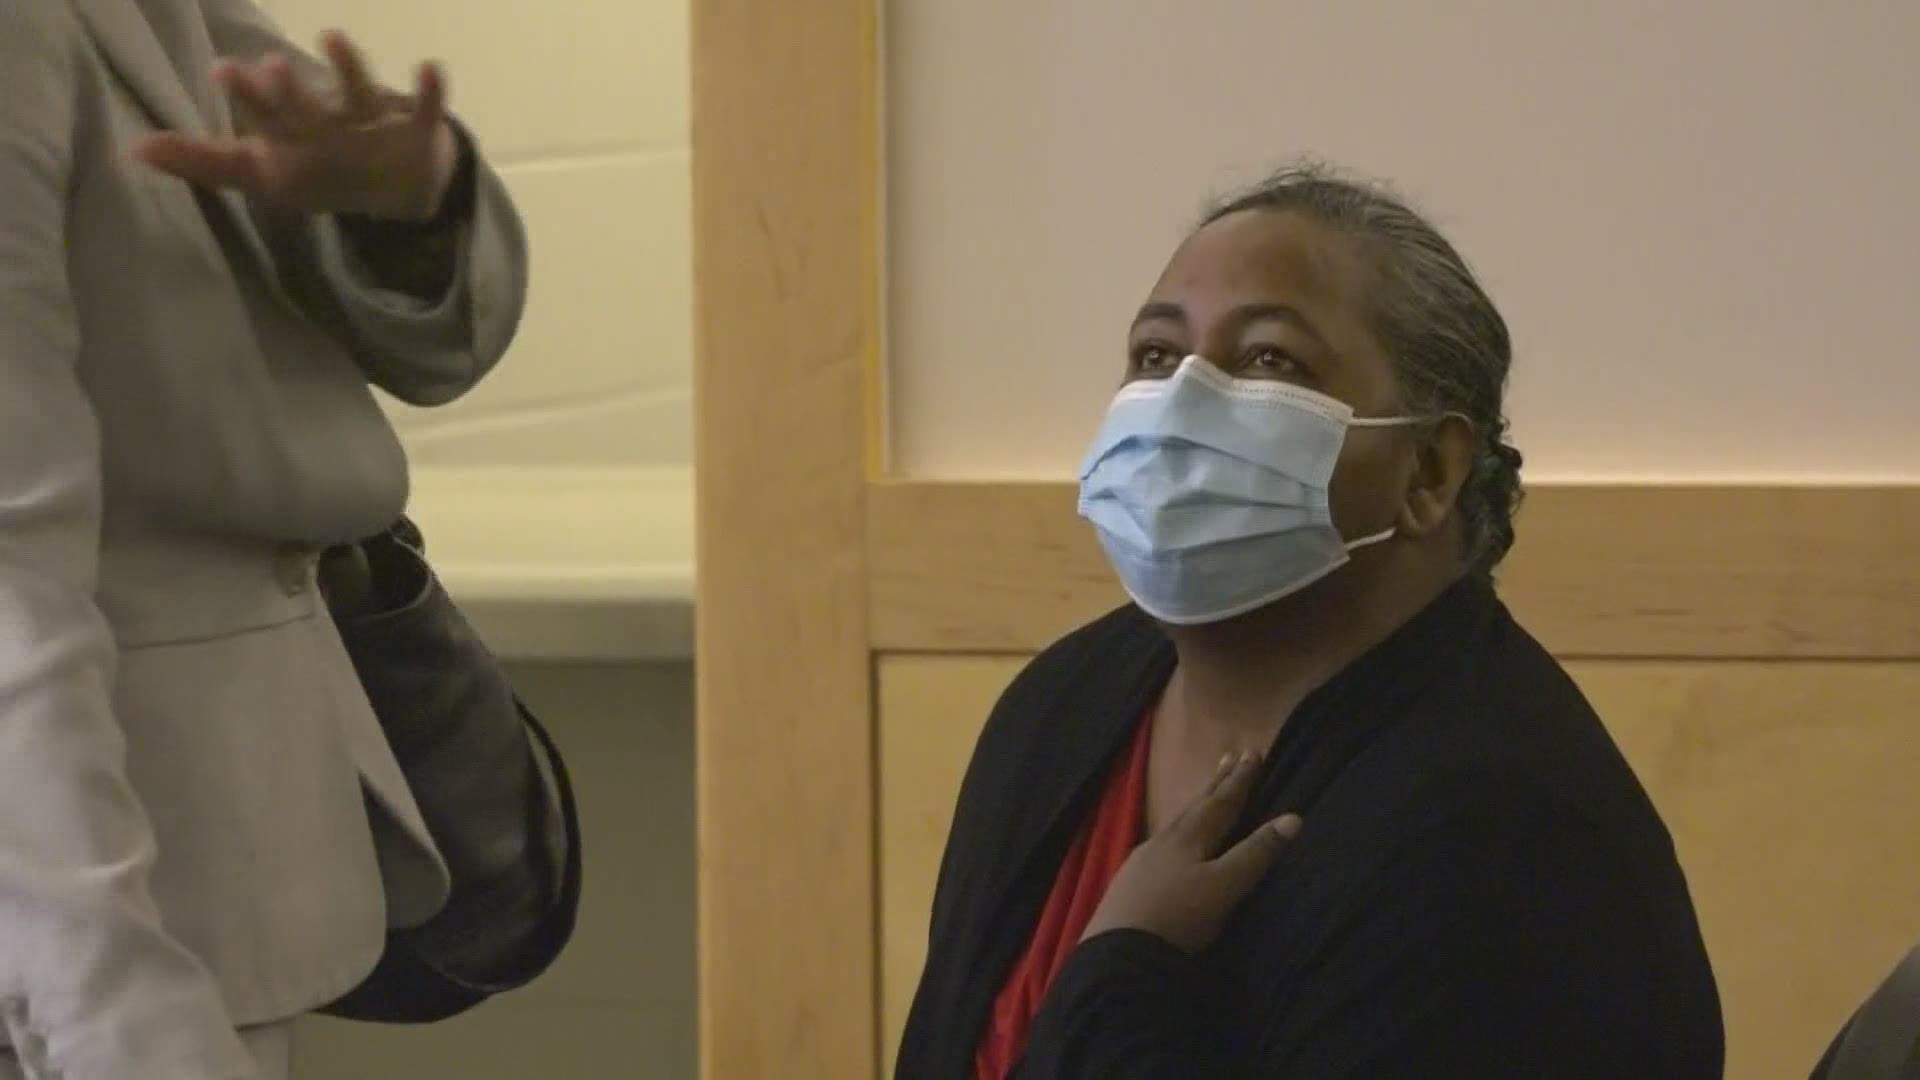 A woman from Milford accused of voter fraud appeared in court Thursday morning in Bangor.